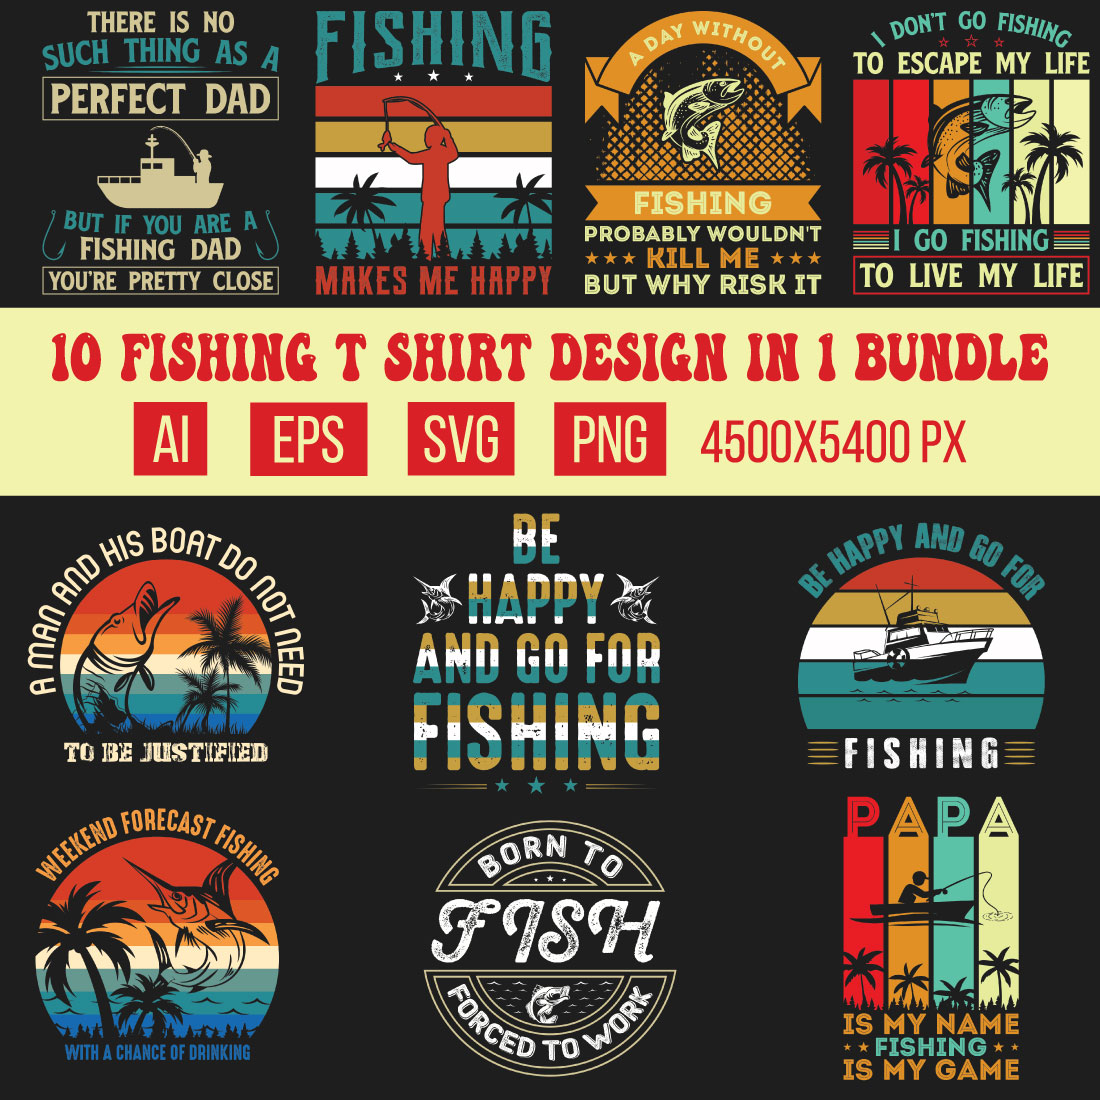 10 Fishing T shirt Designs vector in 1 Bundle cover image.